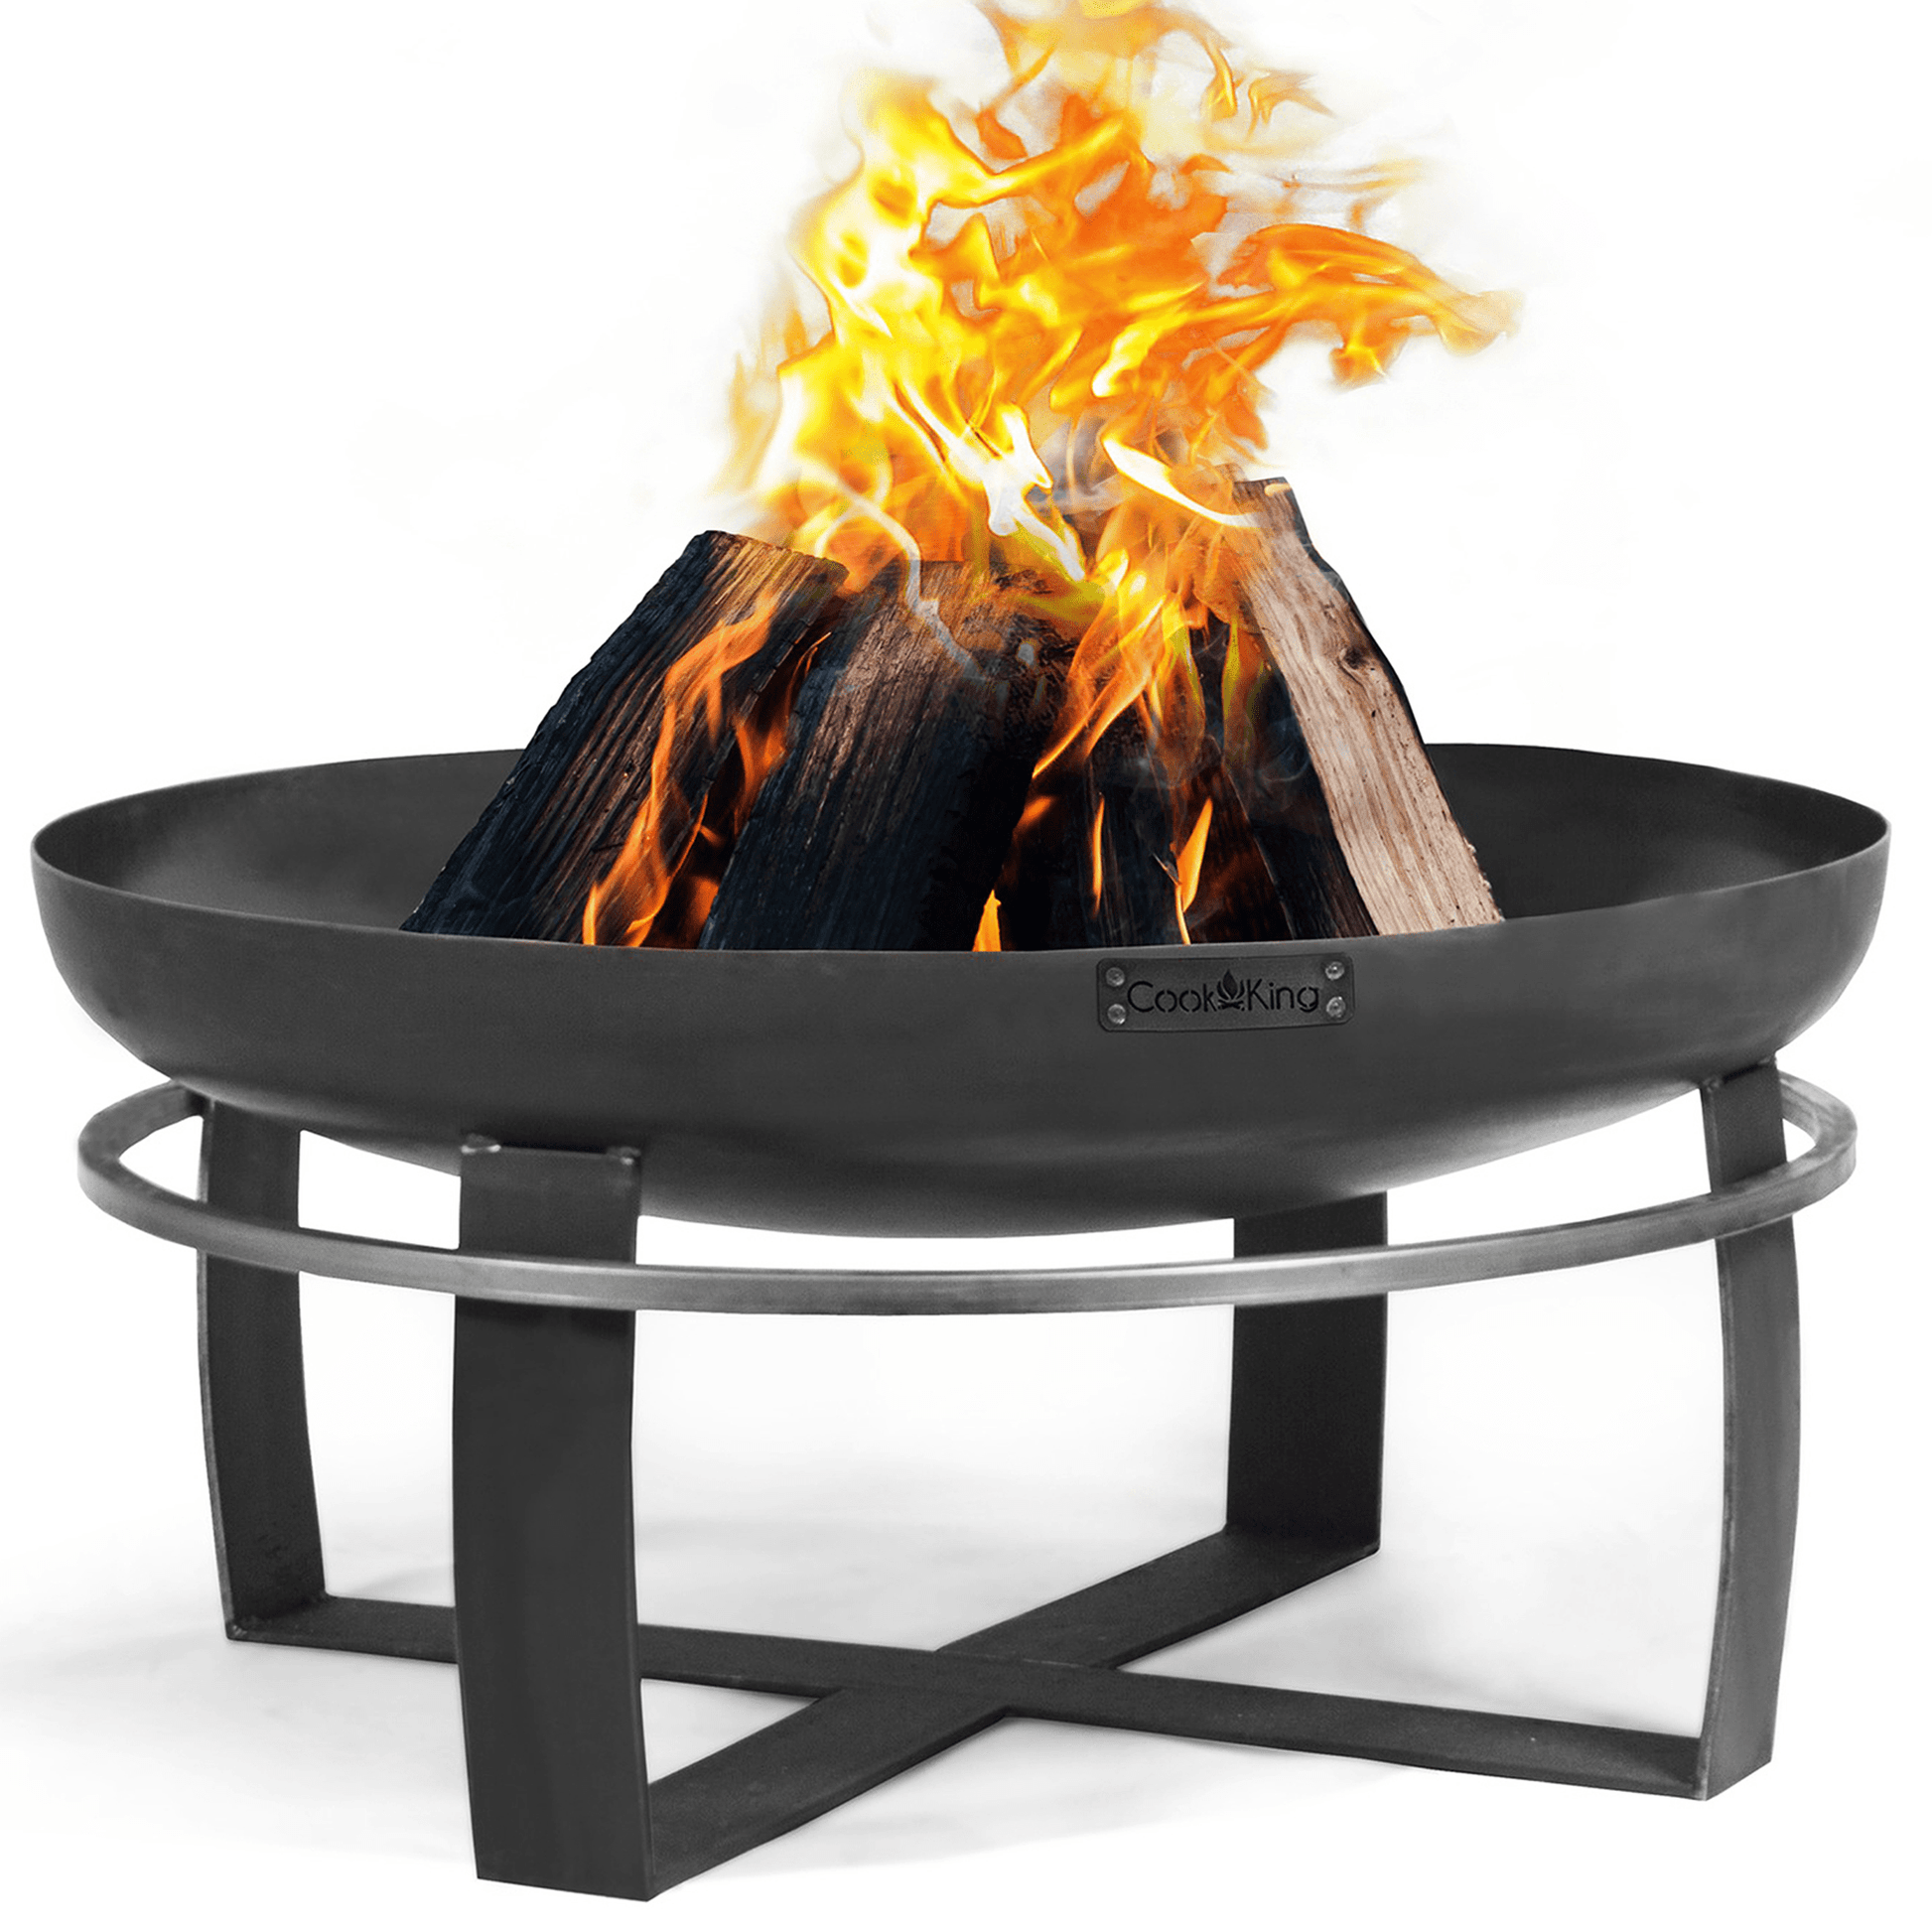 Ignition 32" Fire Pit - Good Directions